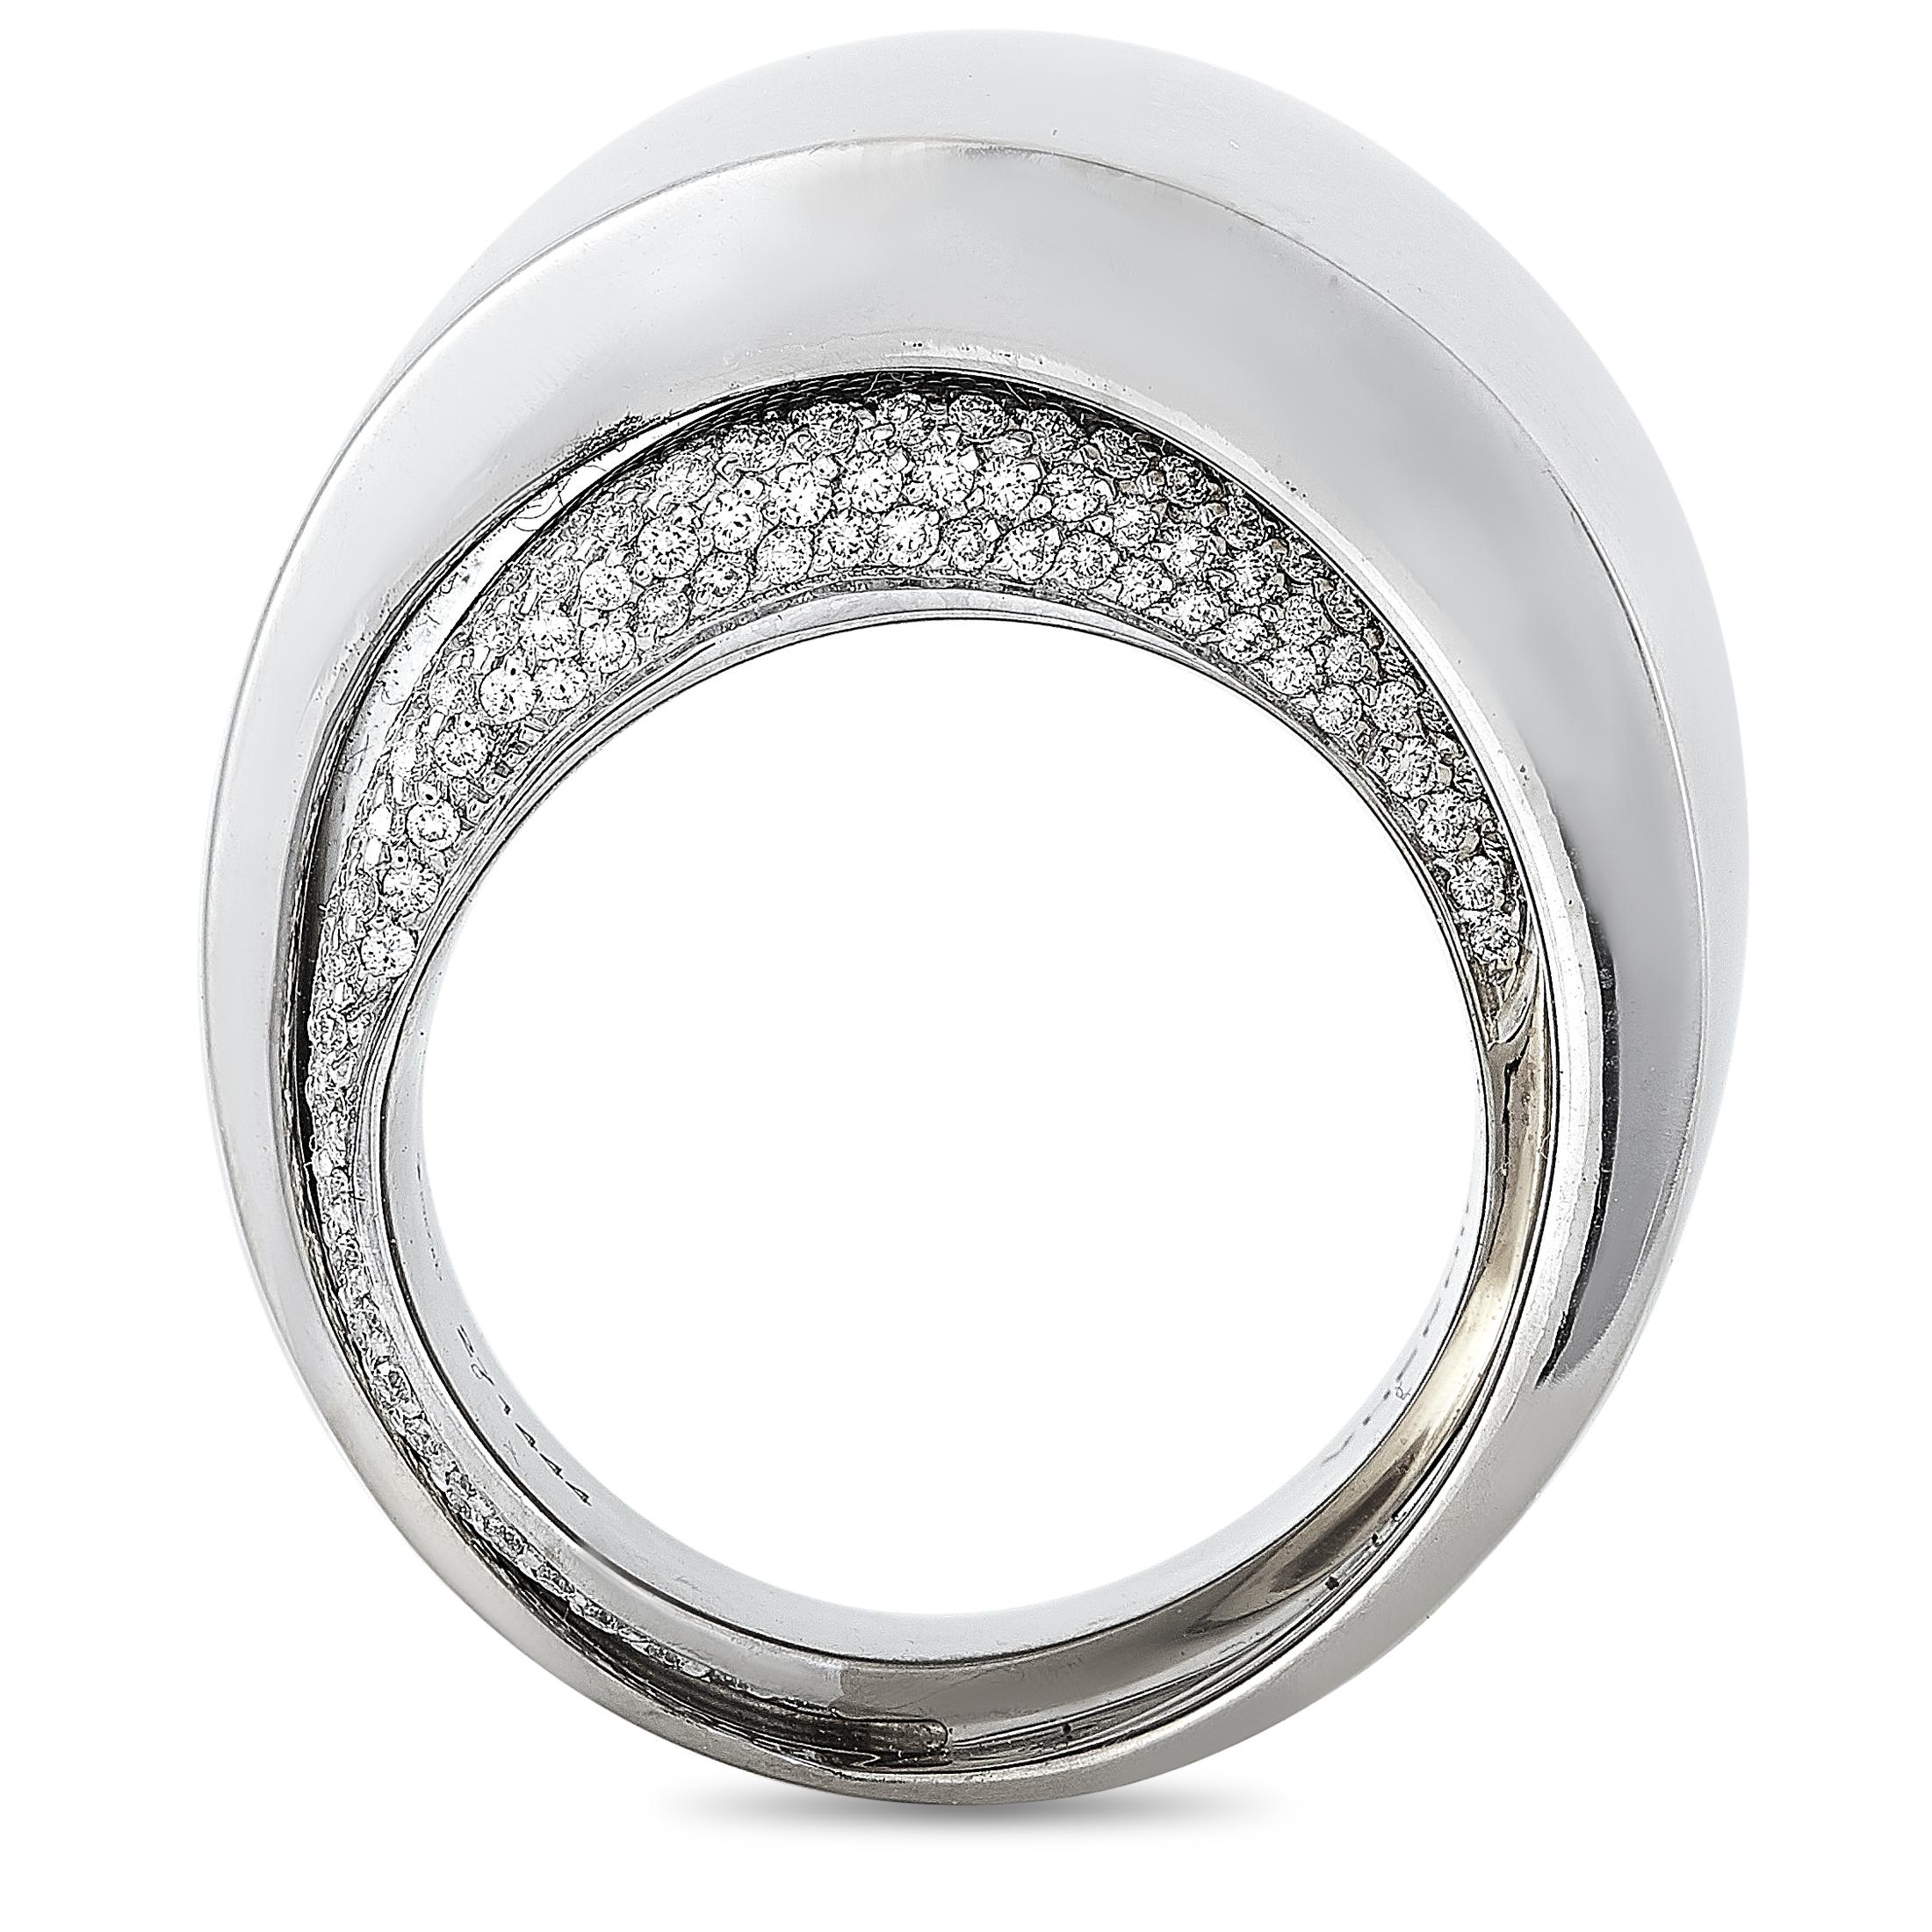 The Vhernier “Tourbillon” ring is crafted from 18K white gold and weighs 33.2 grams, boasting band thickness of 7 mm and top height of 9 mm. The ring is set with diamonds that amount to 1.03 carats.
Ring Size: 6.5

This item is offered in brand new